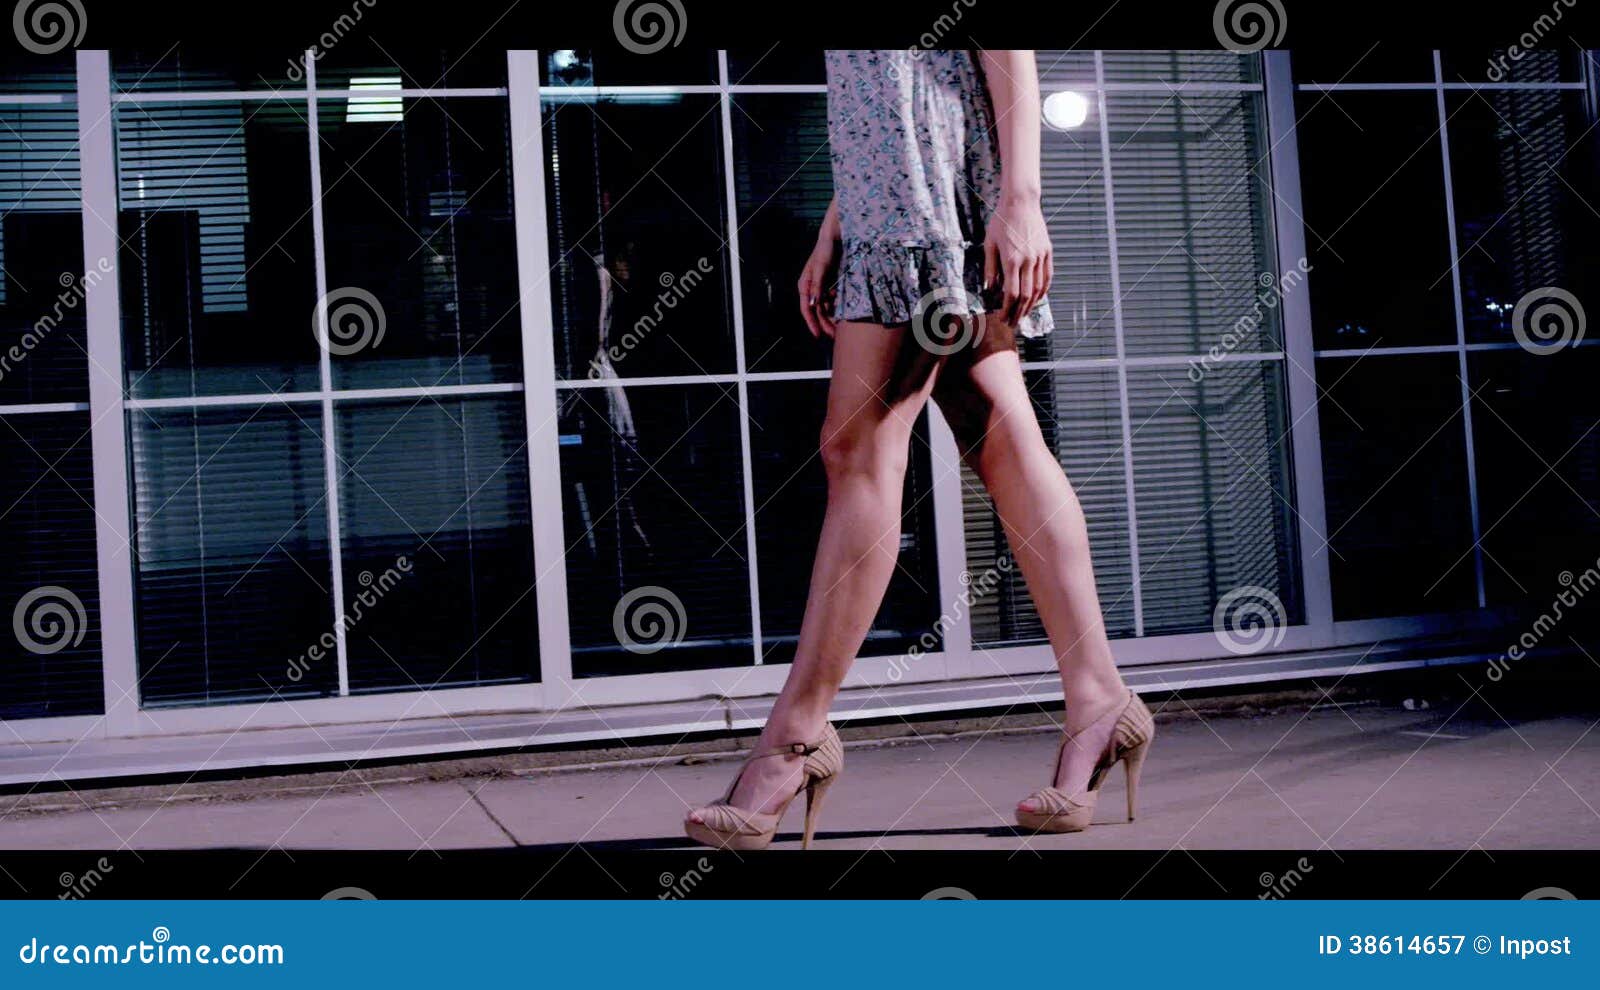 Ladylike candid with nice legs walking in the street